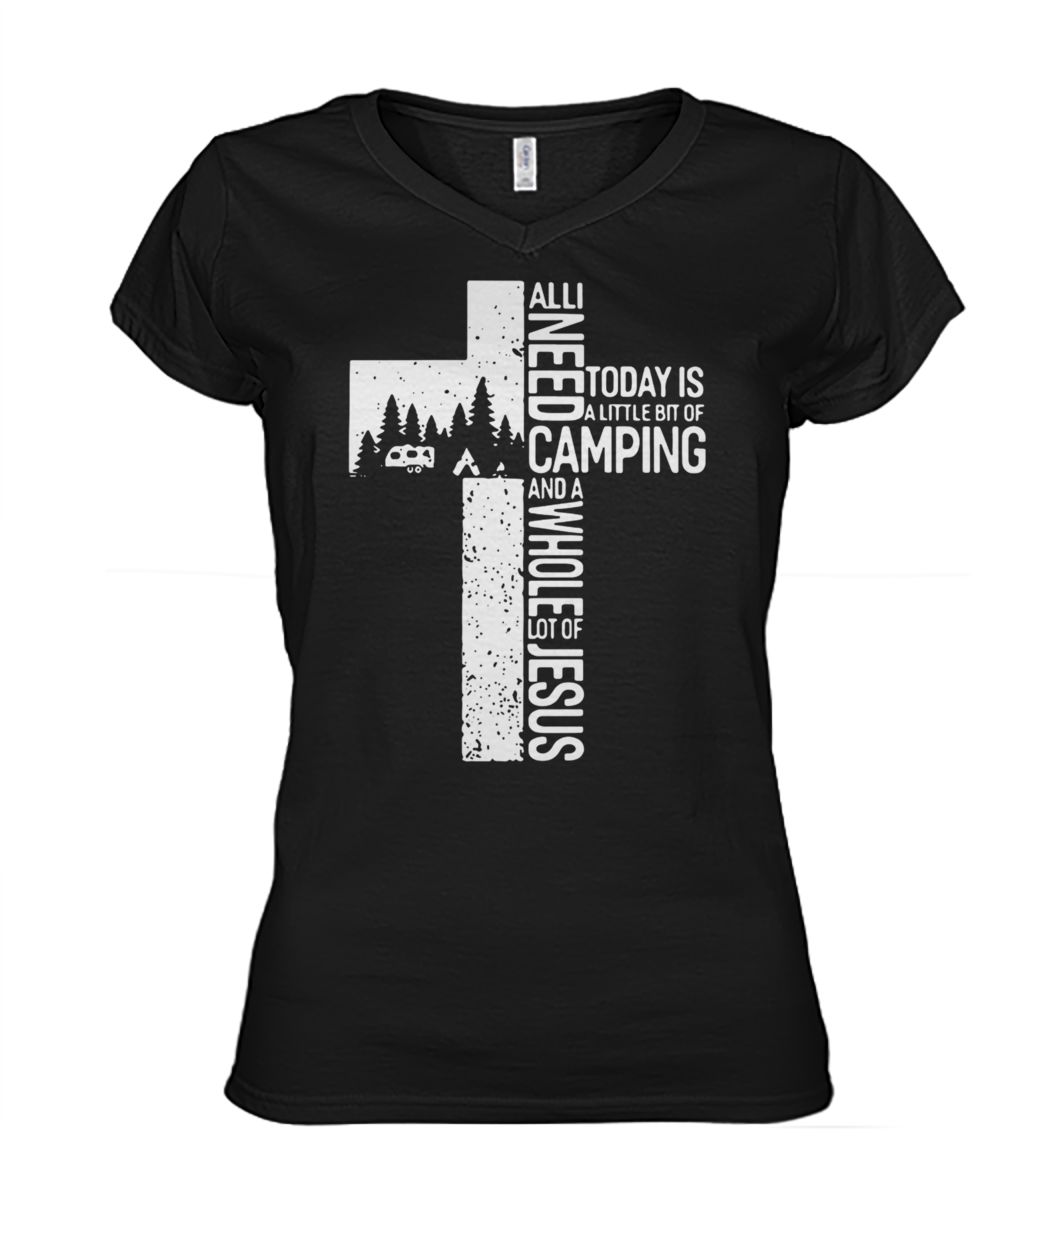 All I need today is a little bit of camping and a whole lot of the cross Jesus women's v-neck